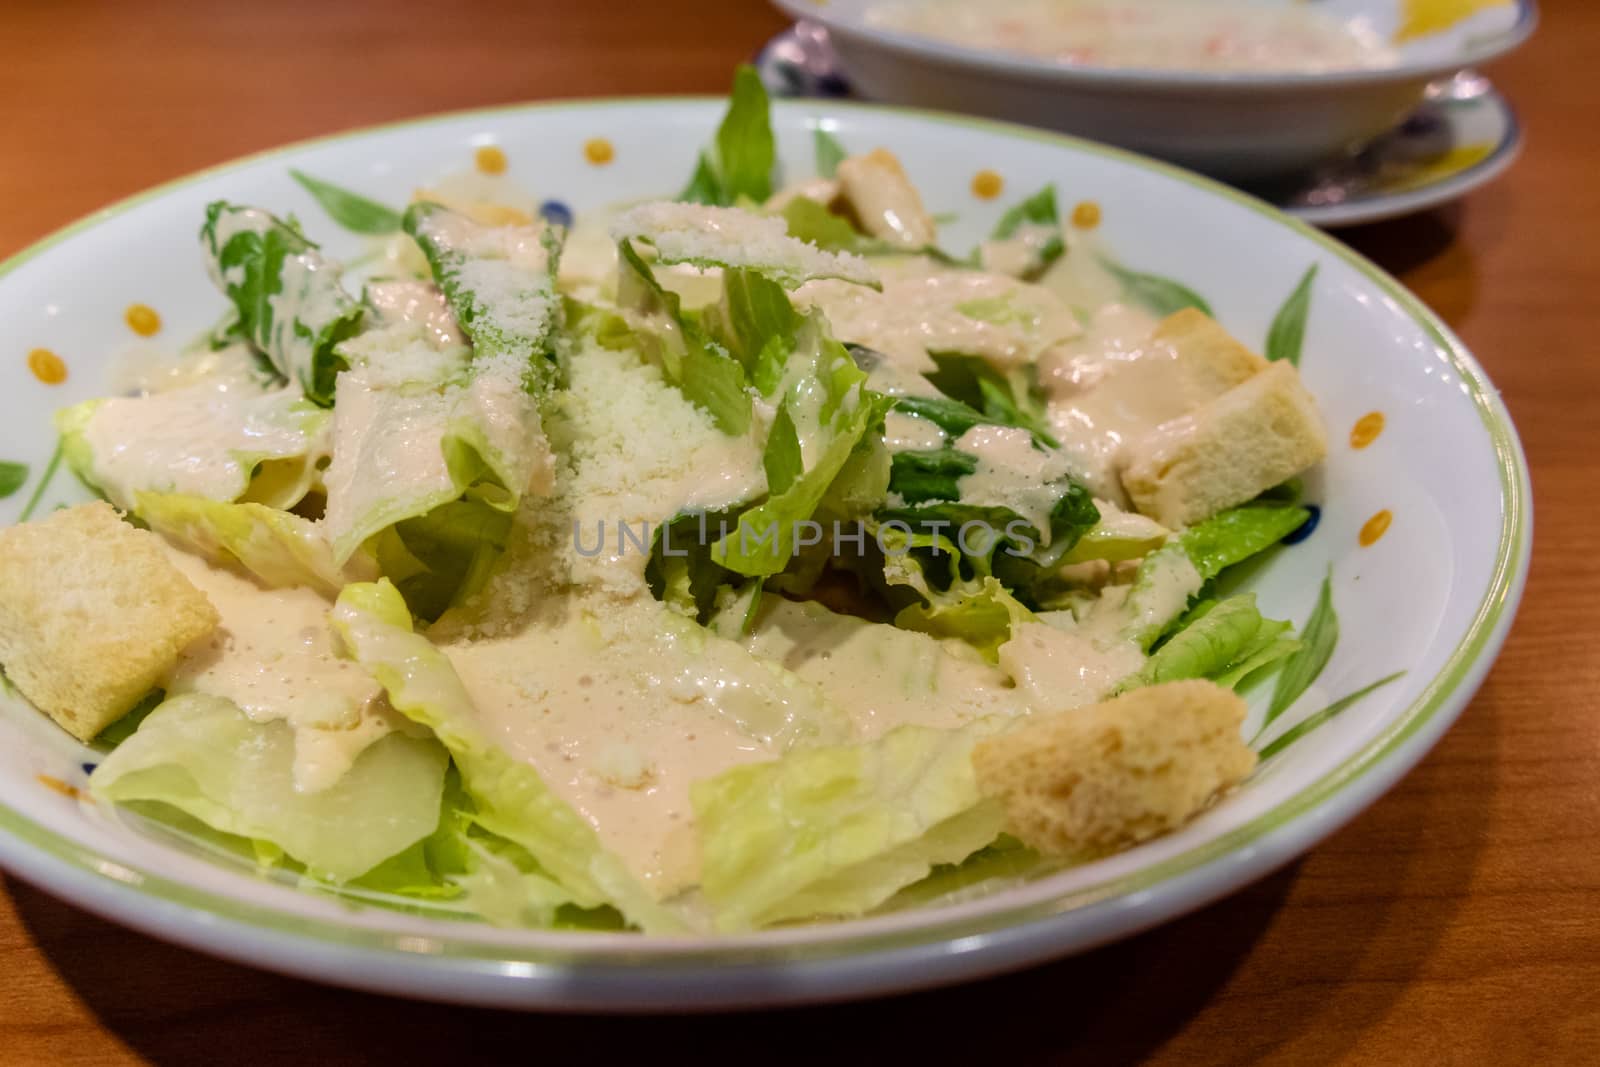 Green leafy salad with croutons in a plate